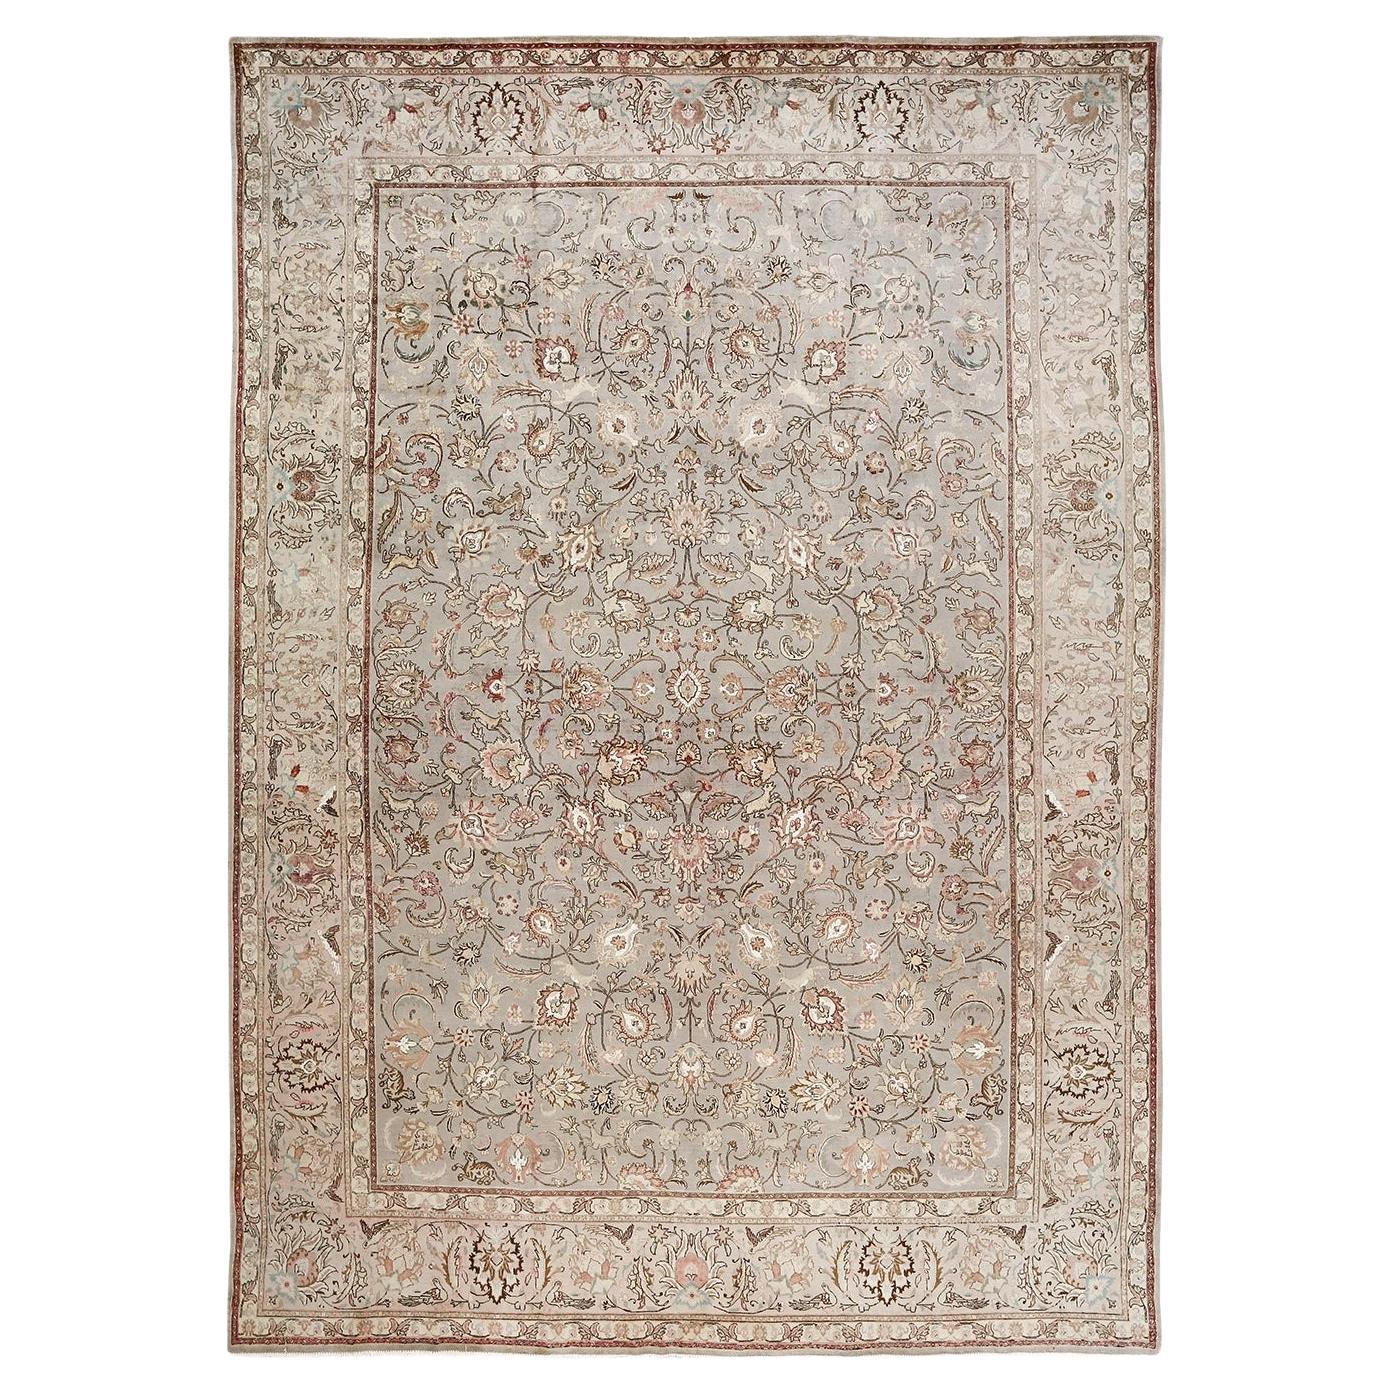 Vintage Persian Tabriz - Size: 11 ft 7 in x 8 ft 2 in For Sale